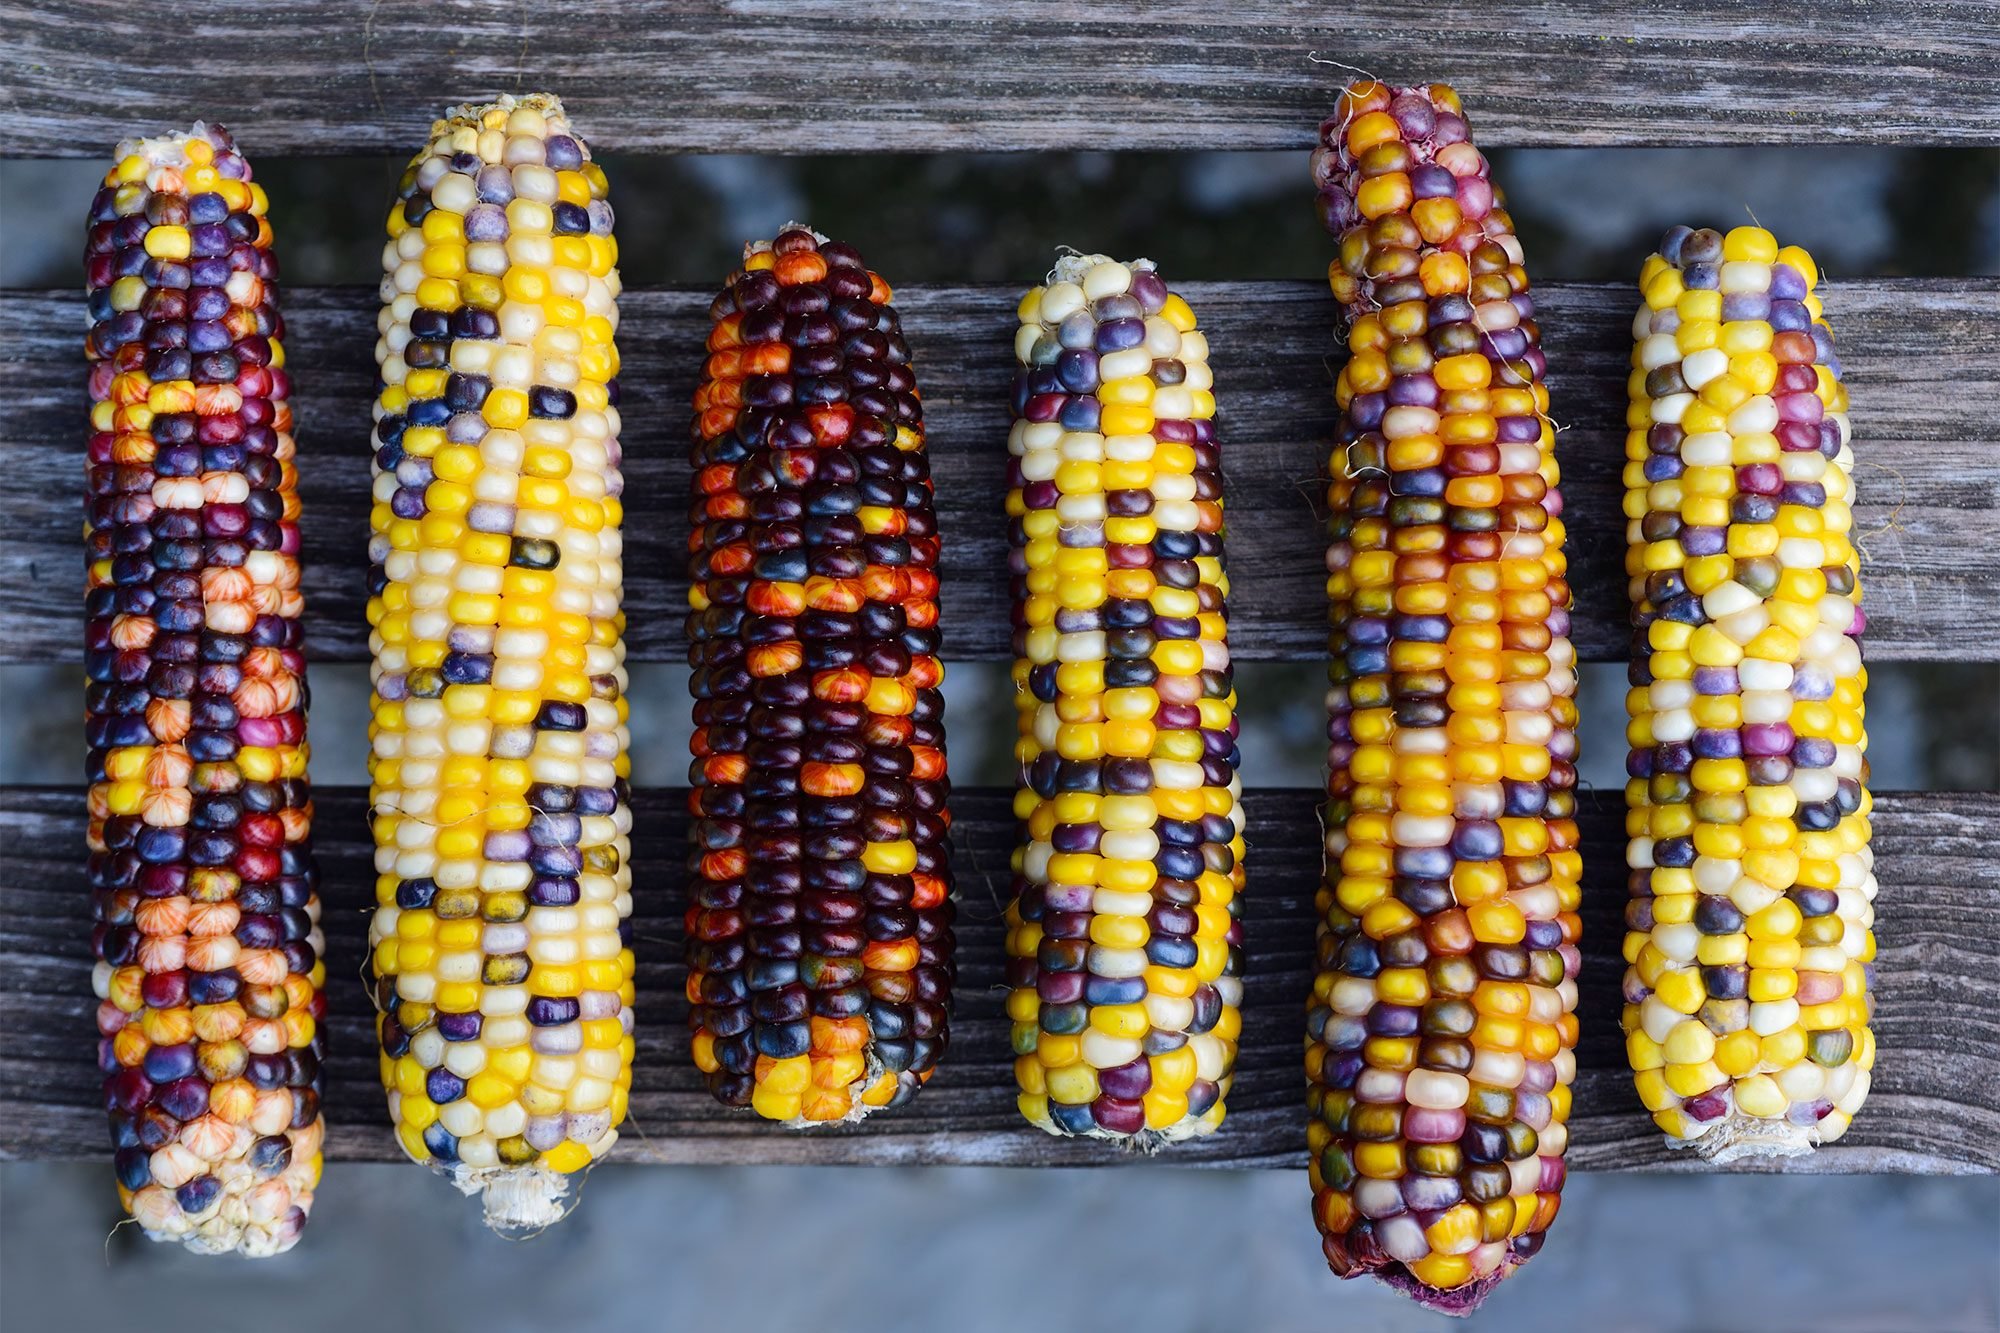 Have You Had Rainbow Colored Corn?  This is called Glass Gem Corn. This  amazingly vibrant strain of rainbow colored corn is a type of “flint corn”  which is grown not for